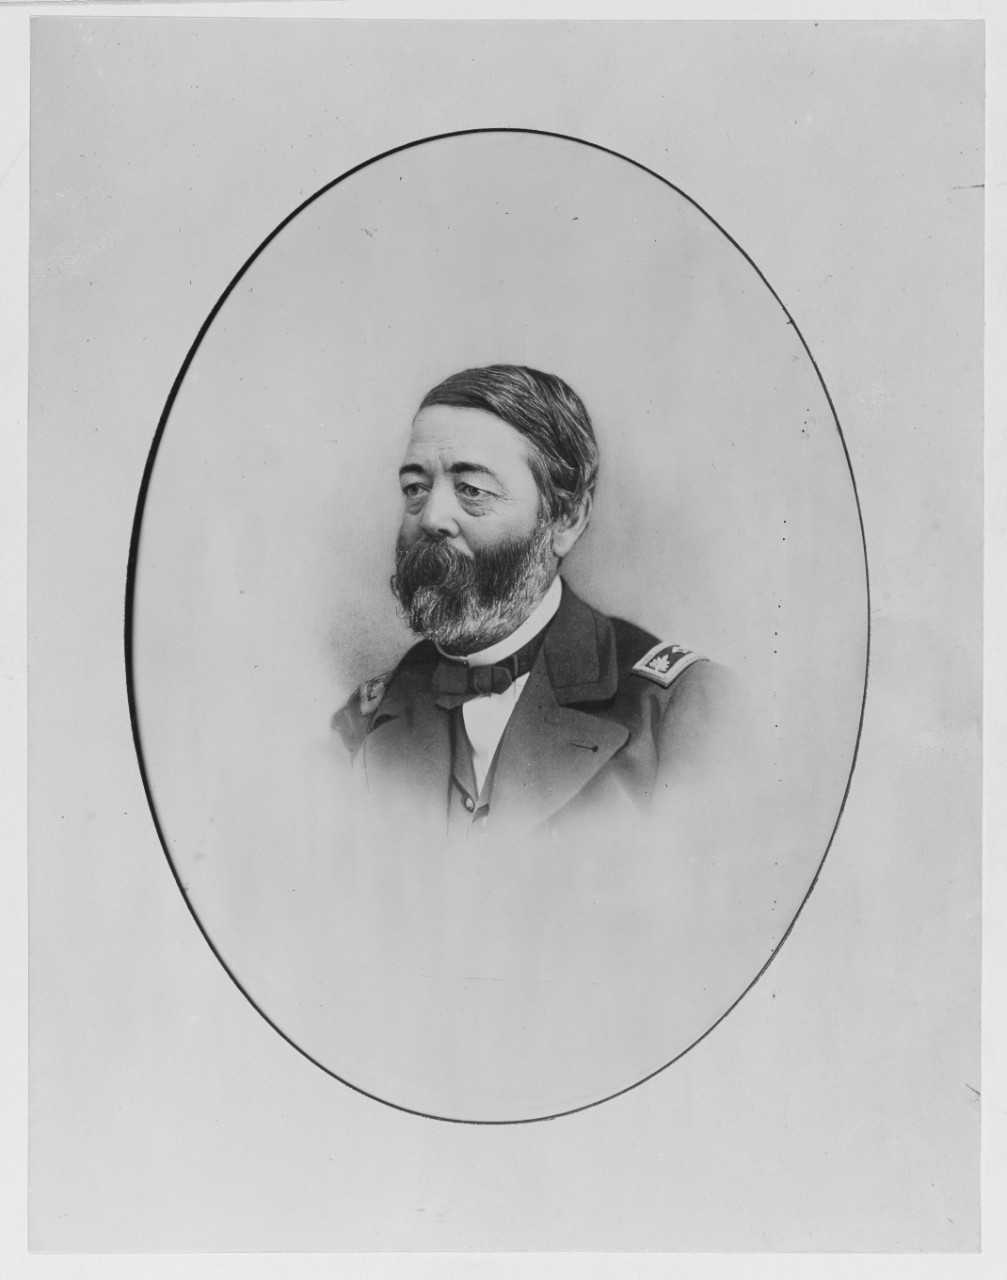 Wise Henry Agustus, CDR, USN served as chief of The Bureau of Ordnance from 25 June 1863 until 1 June 1868